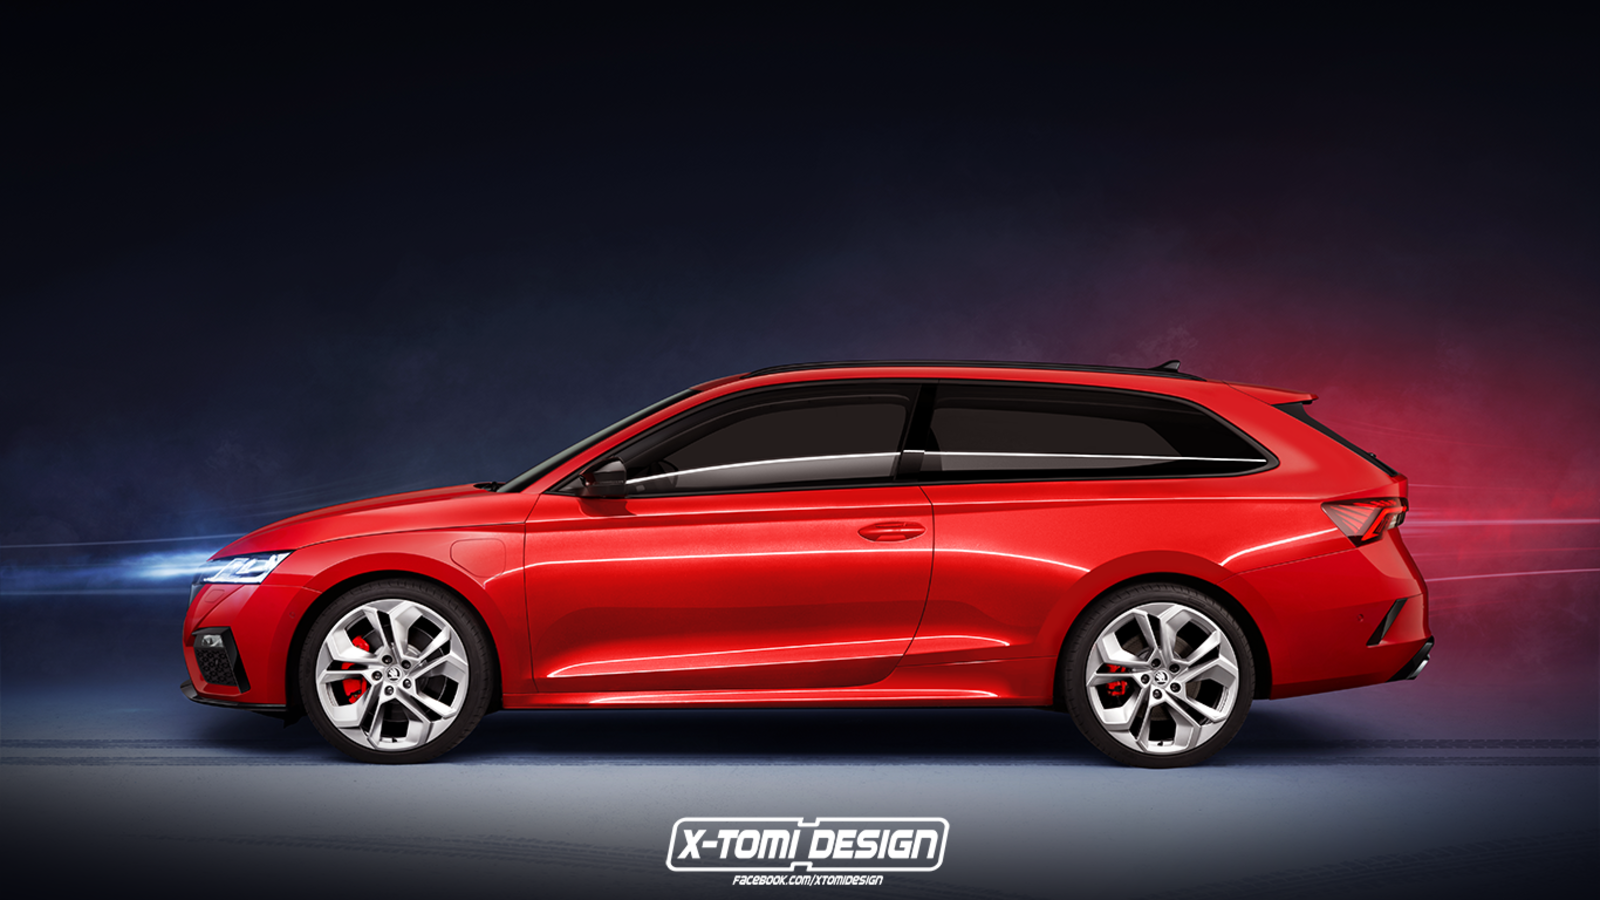 Illustration for article titled Well youve all seen the new Skoda Octavia, but Car Throttle did some renderings.